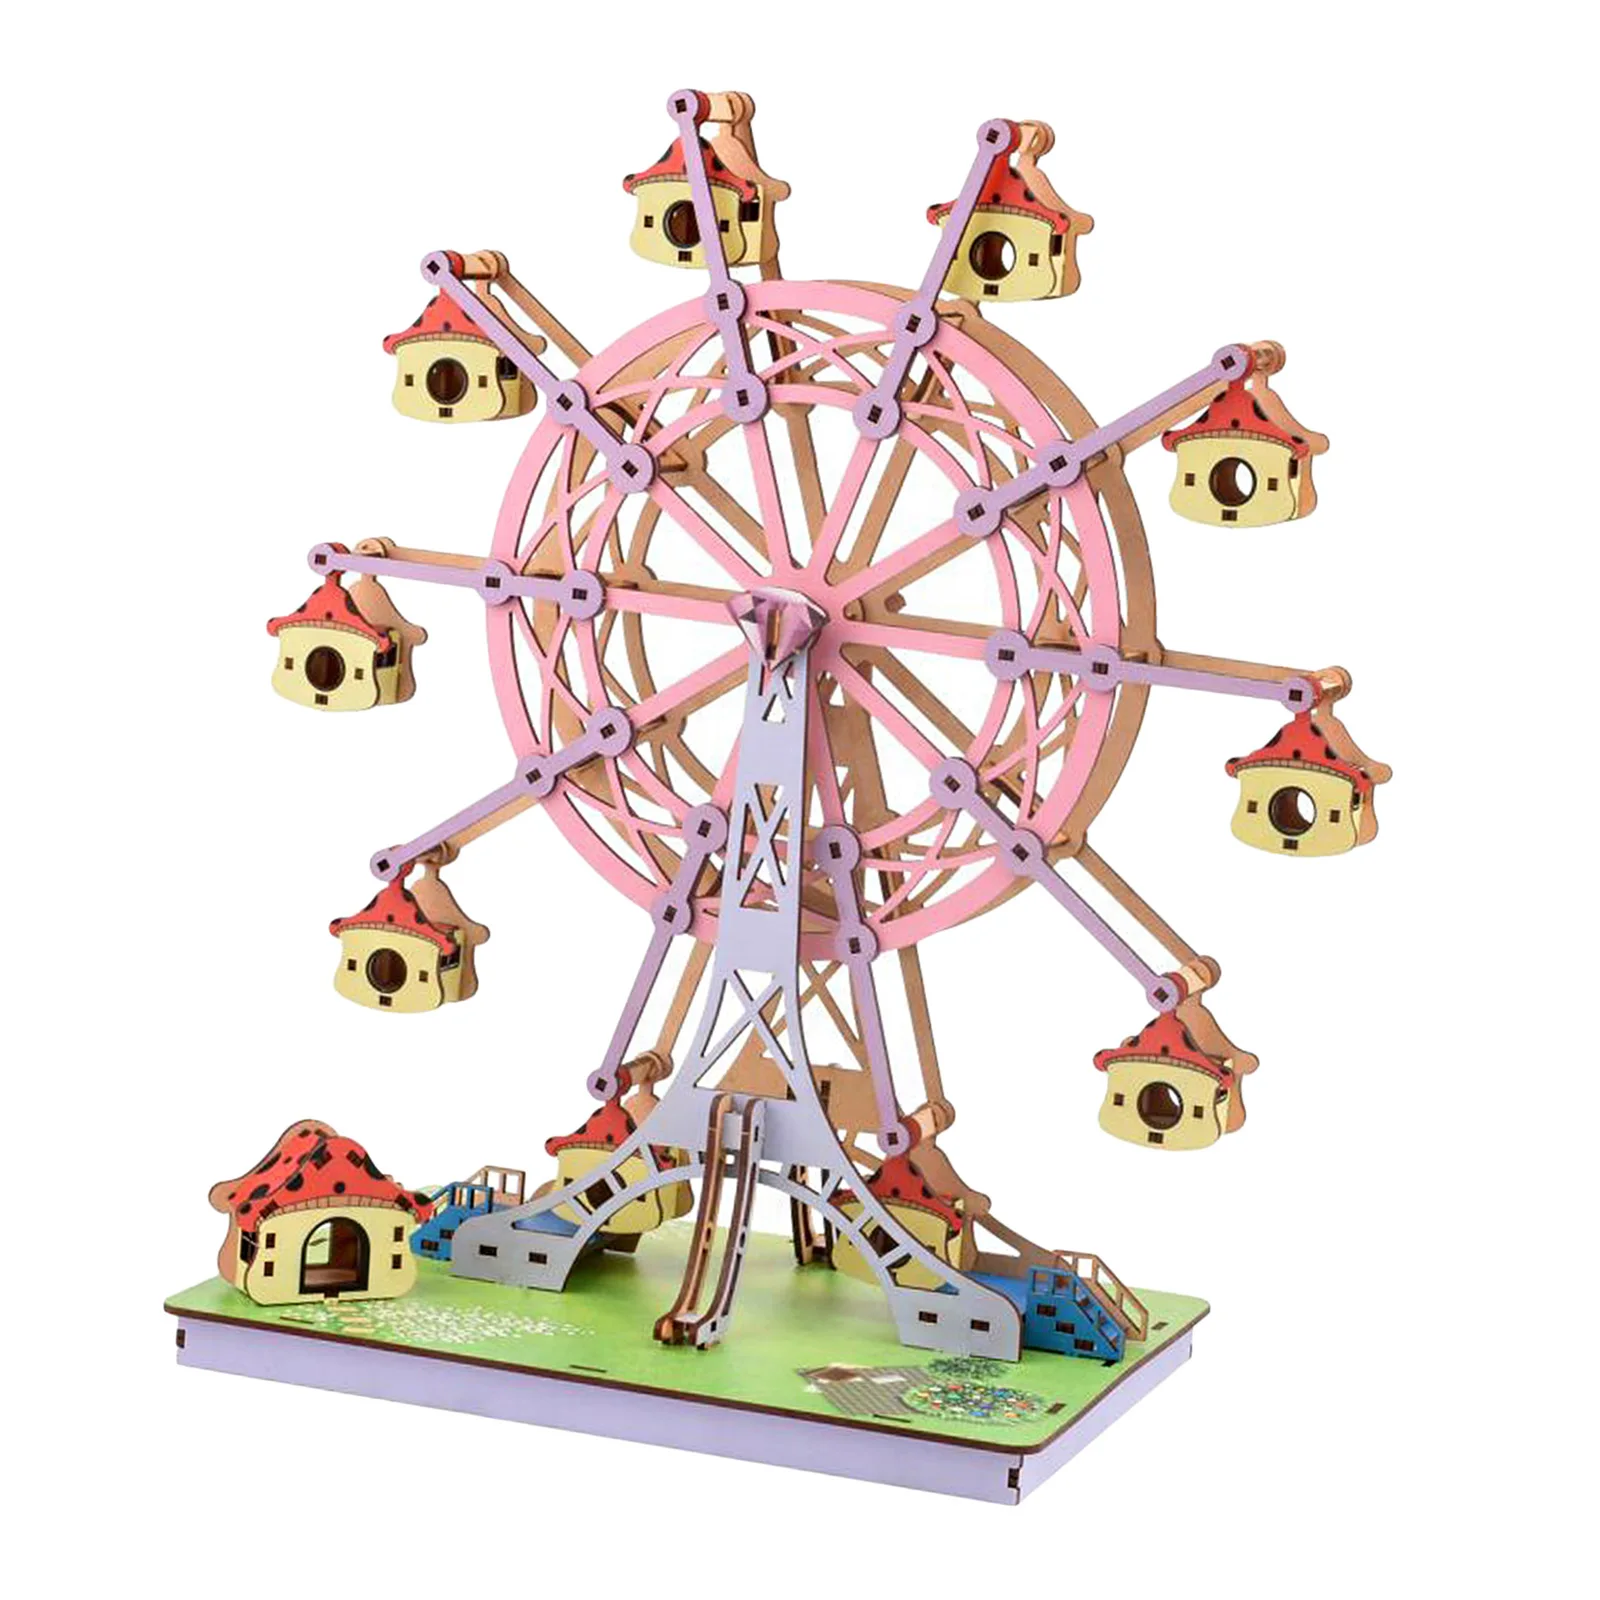 DIY 3D Wooden Puzzle Ferris Wheel Model Building Kit Toys Gift for Children Adult Teens Craft Toy